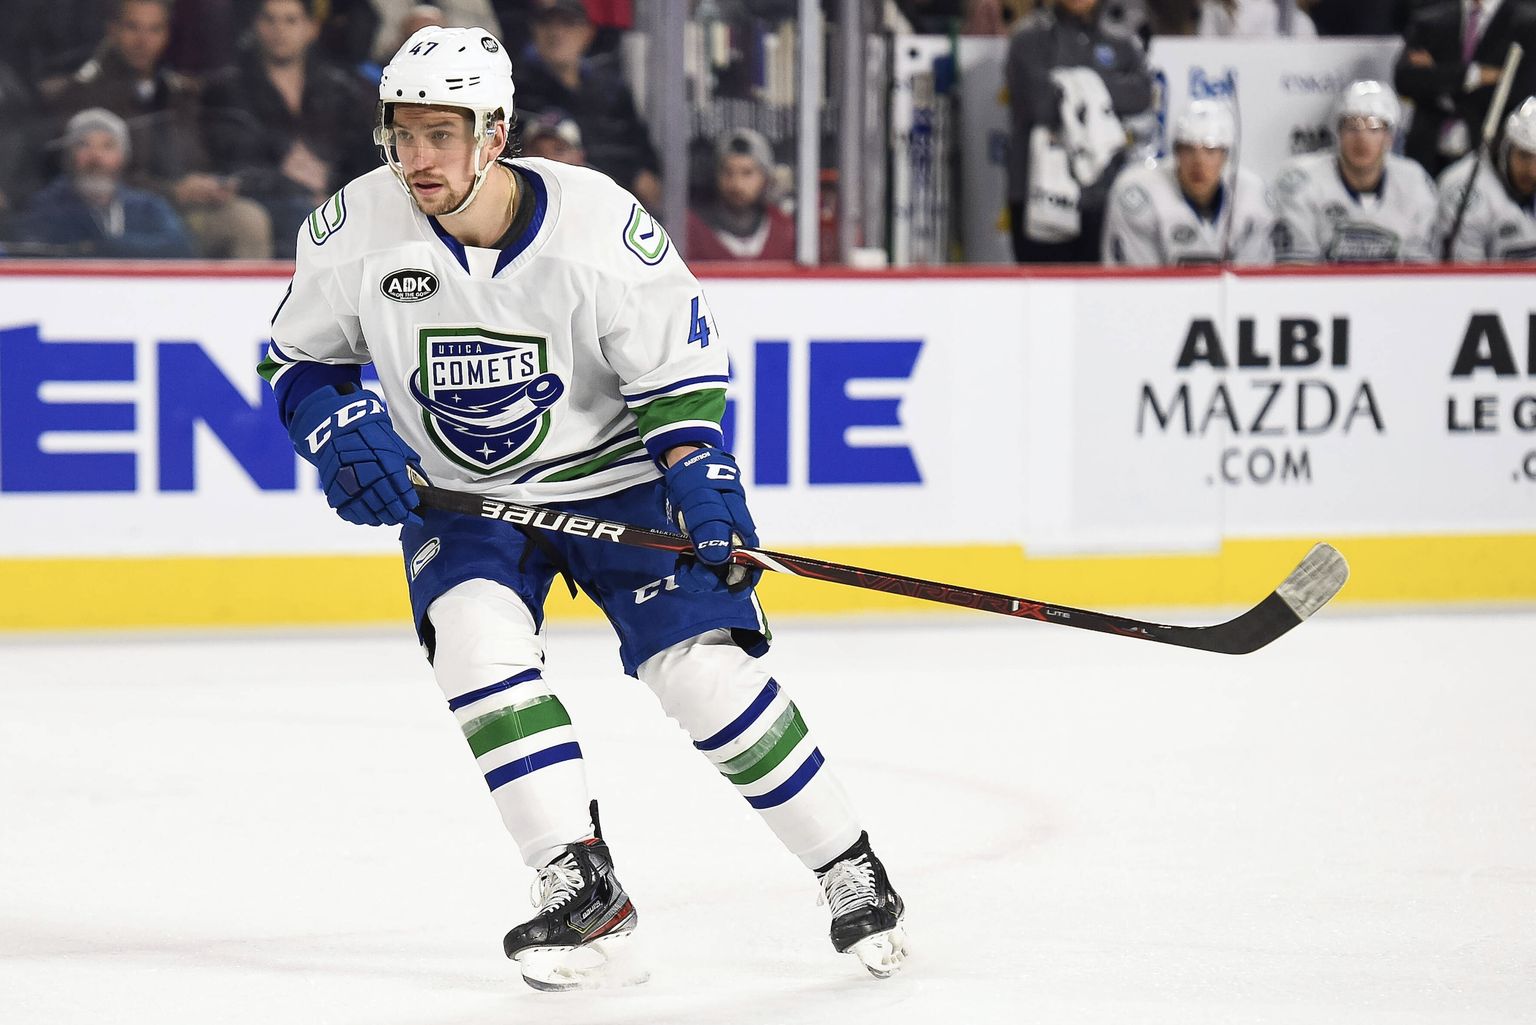 LAVAL, QC - FEBRUARY 05: Utica Comets left wing Sven Baertschi (47) tracks the play during the Utica Comets versus the Laval Rocket game on February 05, 2020, at Place Bell in Laval, QC (Photo by Davi ...